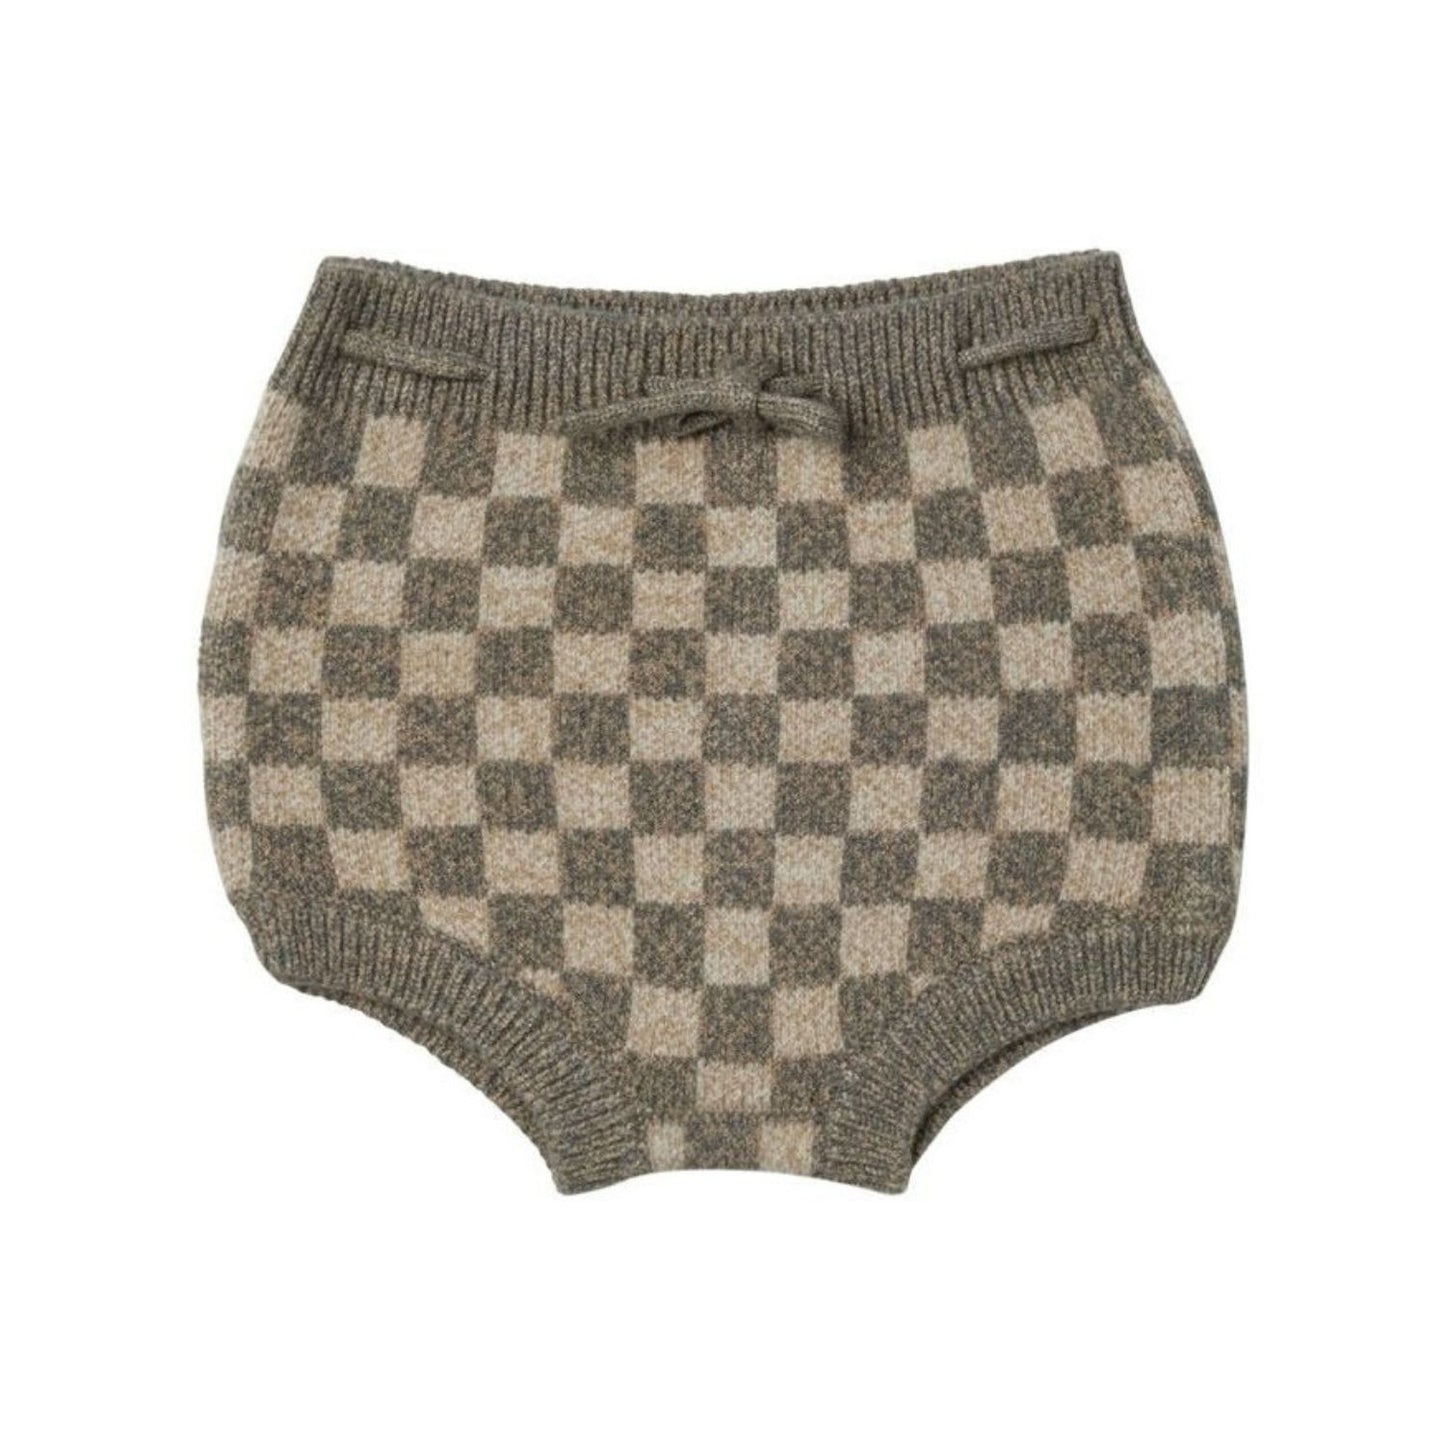 Knit Bloomer - Heathered Check - Blue / Sand Checker - RC